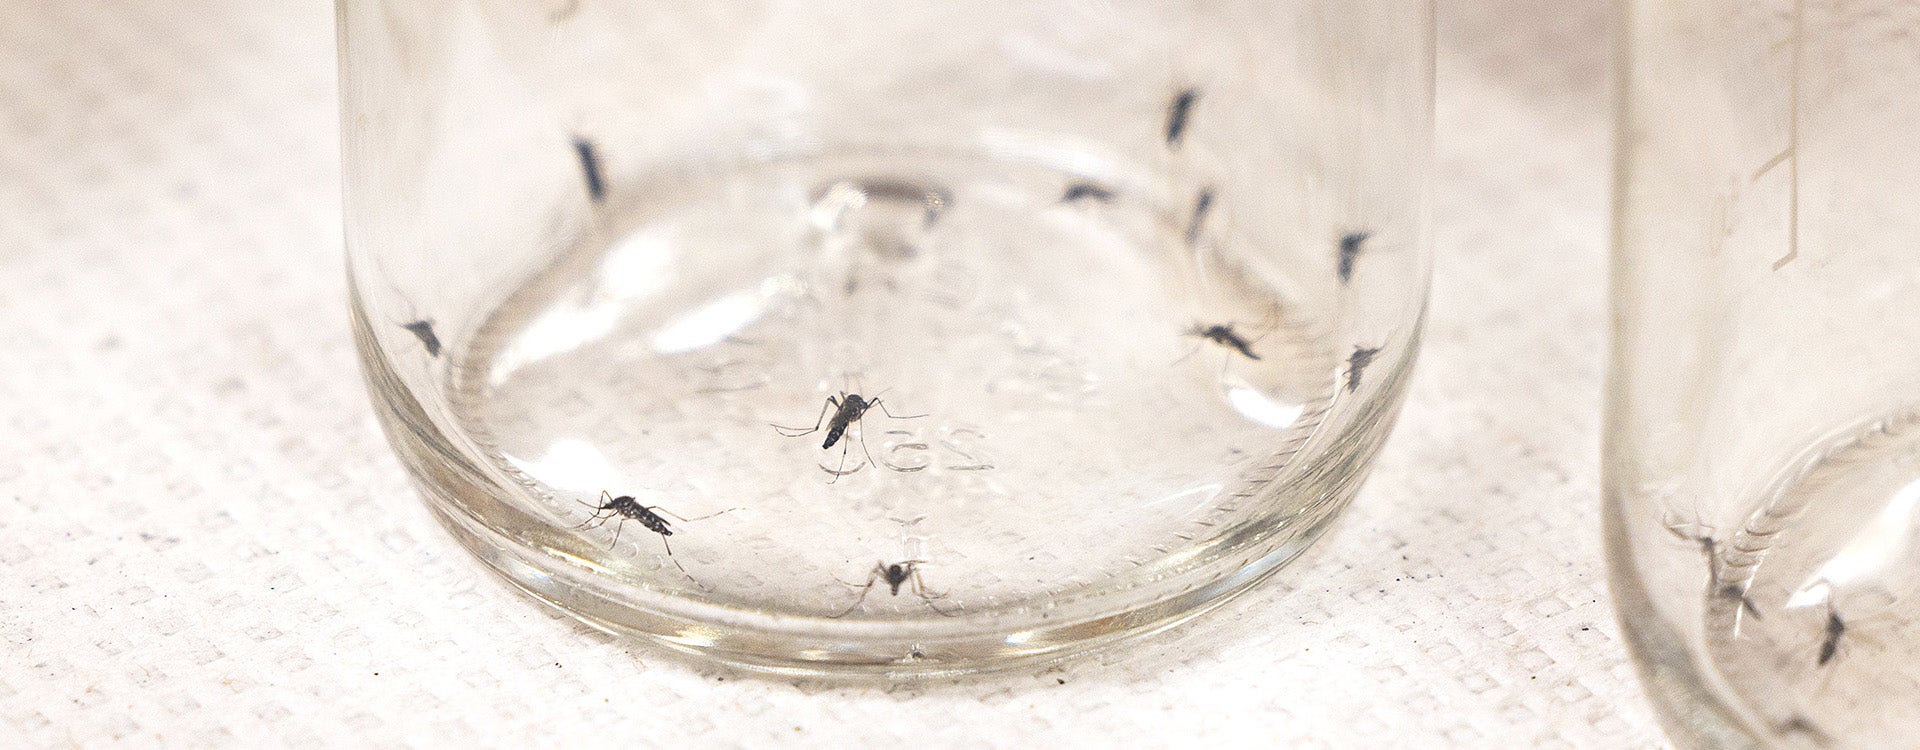 The biotechnology center has also funded research into a potential nanopesticide for mosquitoes. Photo by Rhett Butler